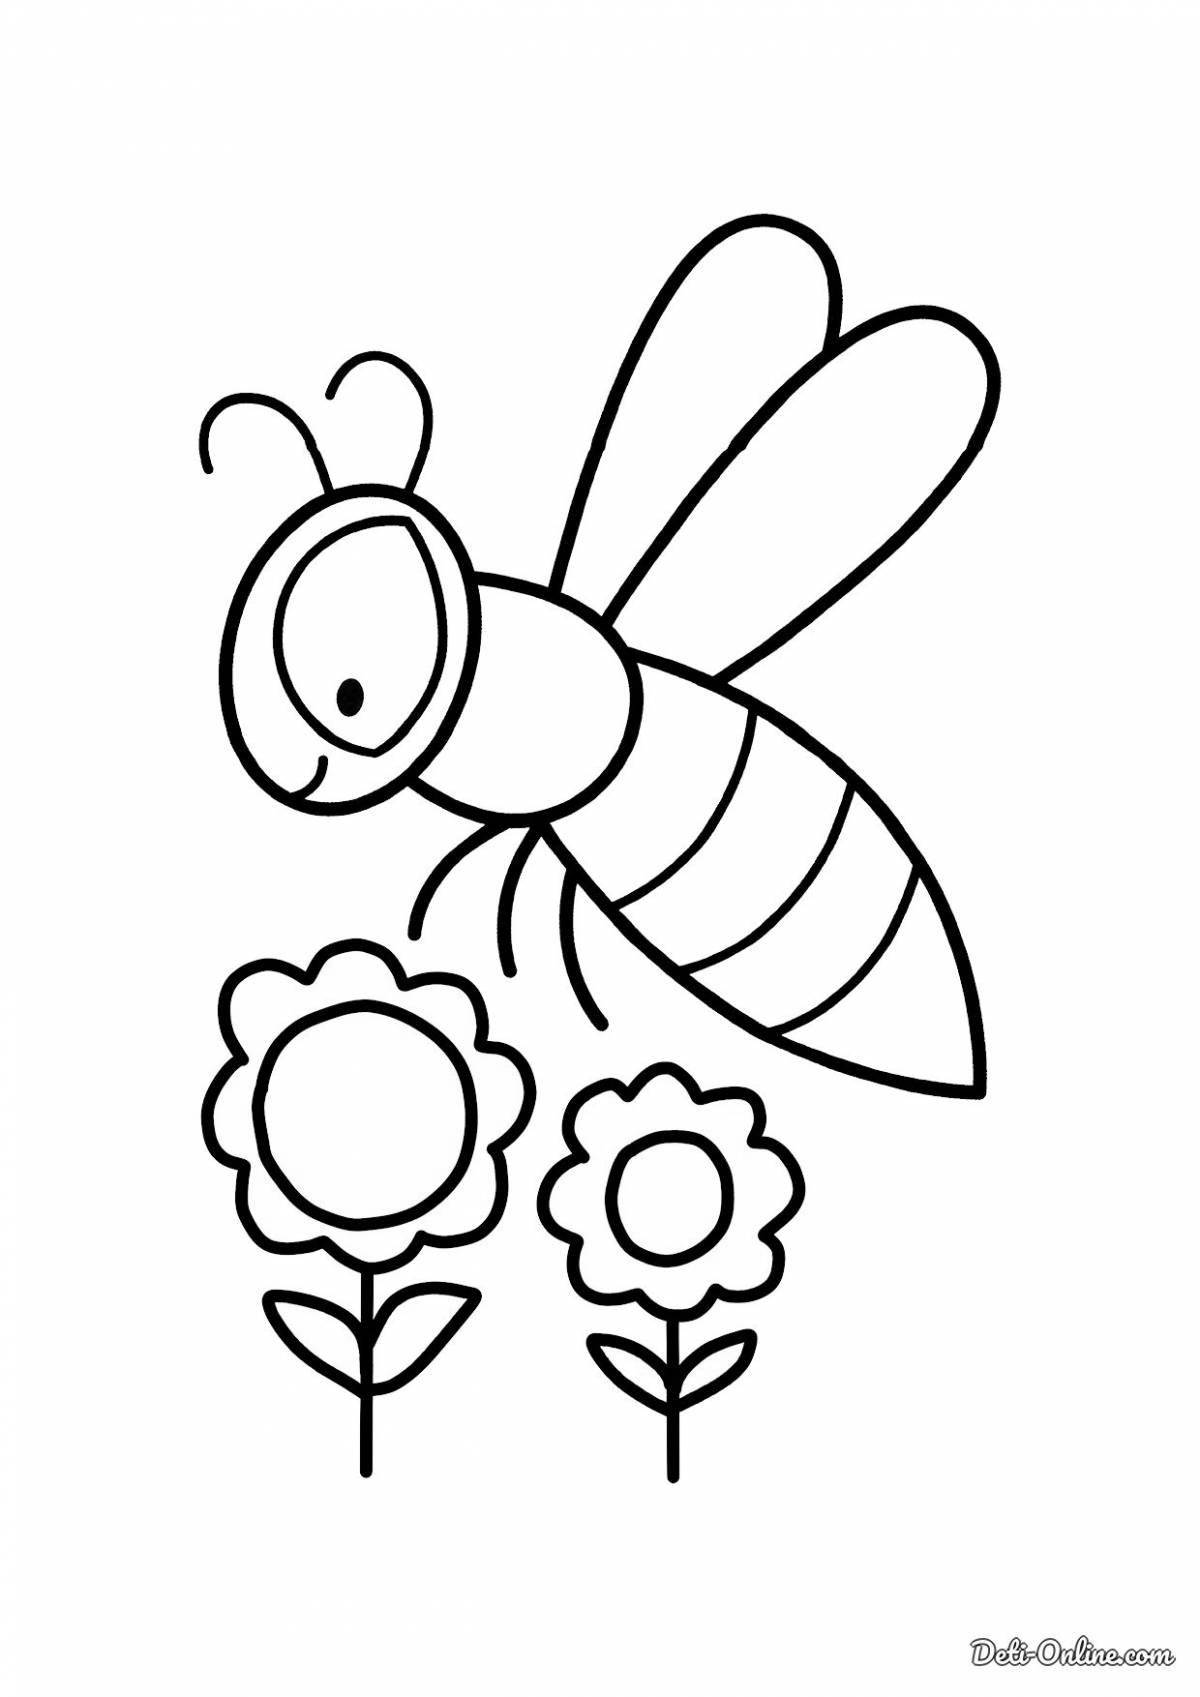 Playful fly coloring book for 3-4 year olds